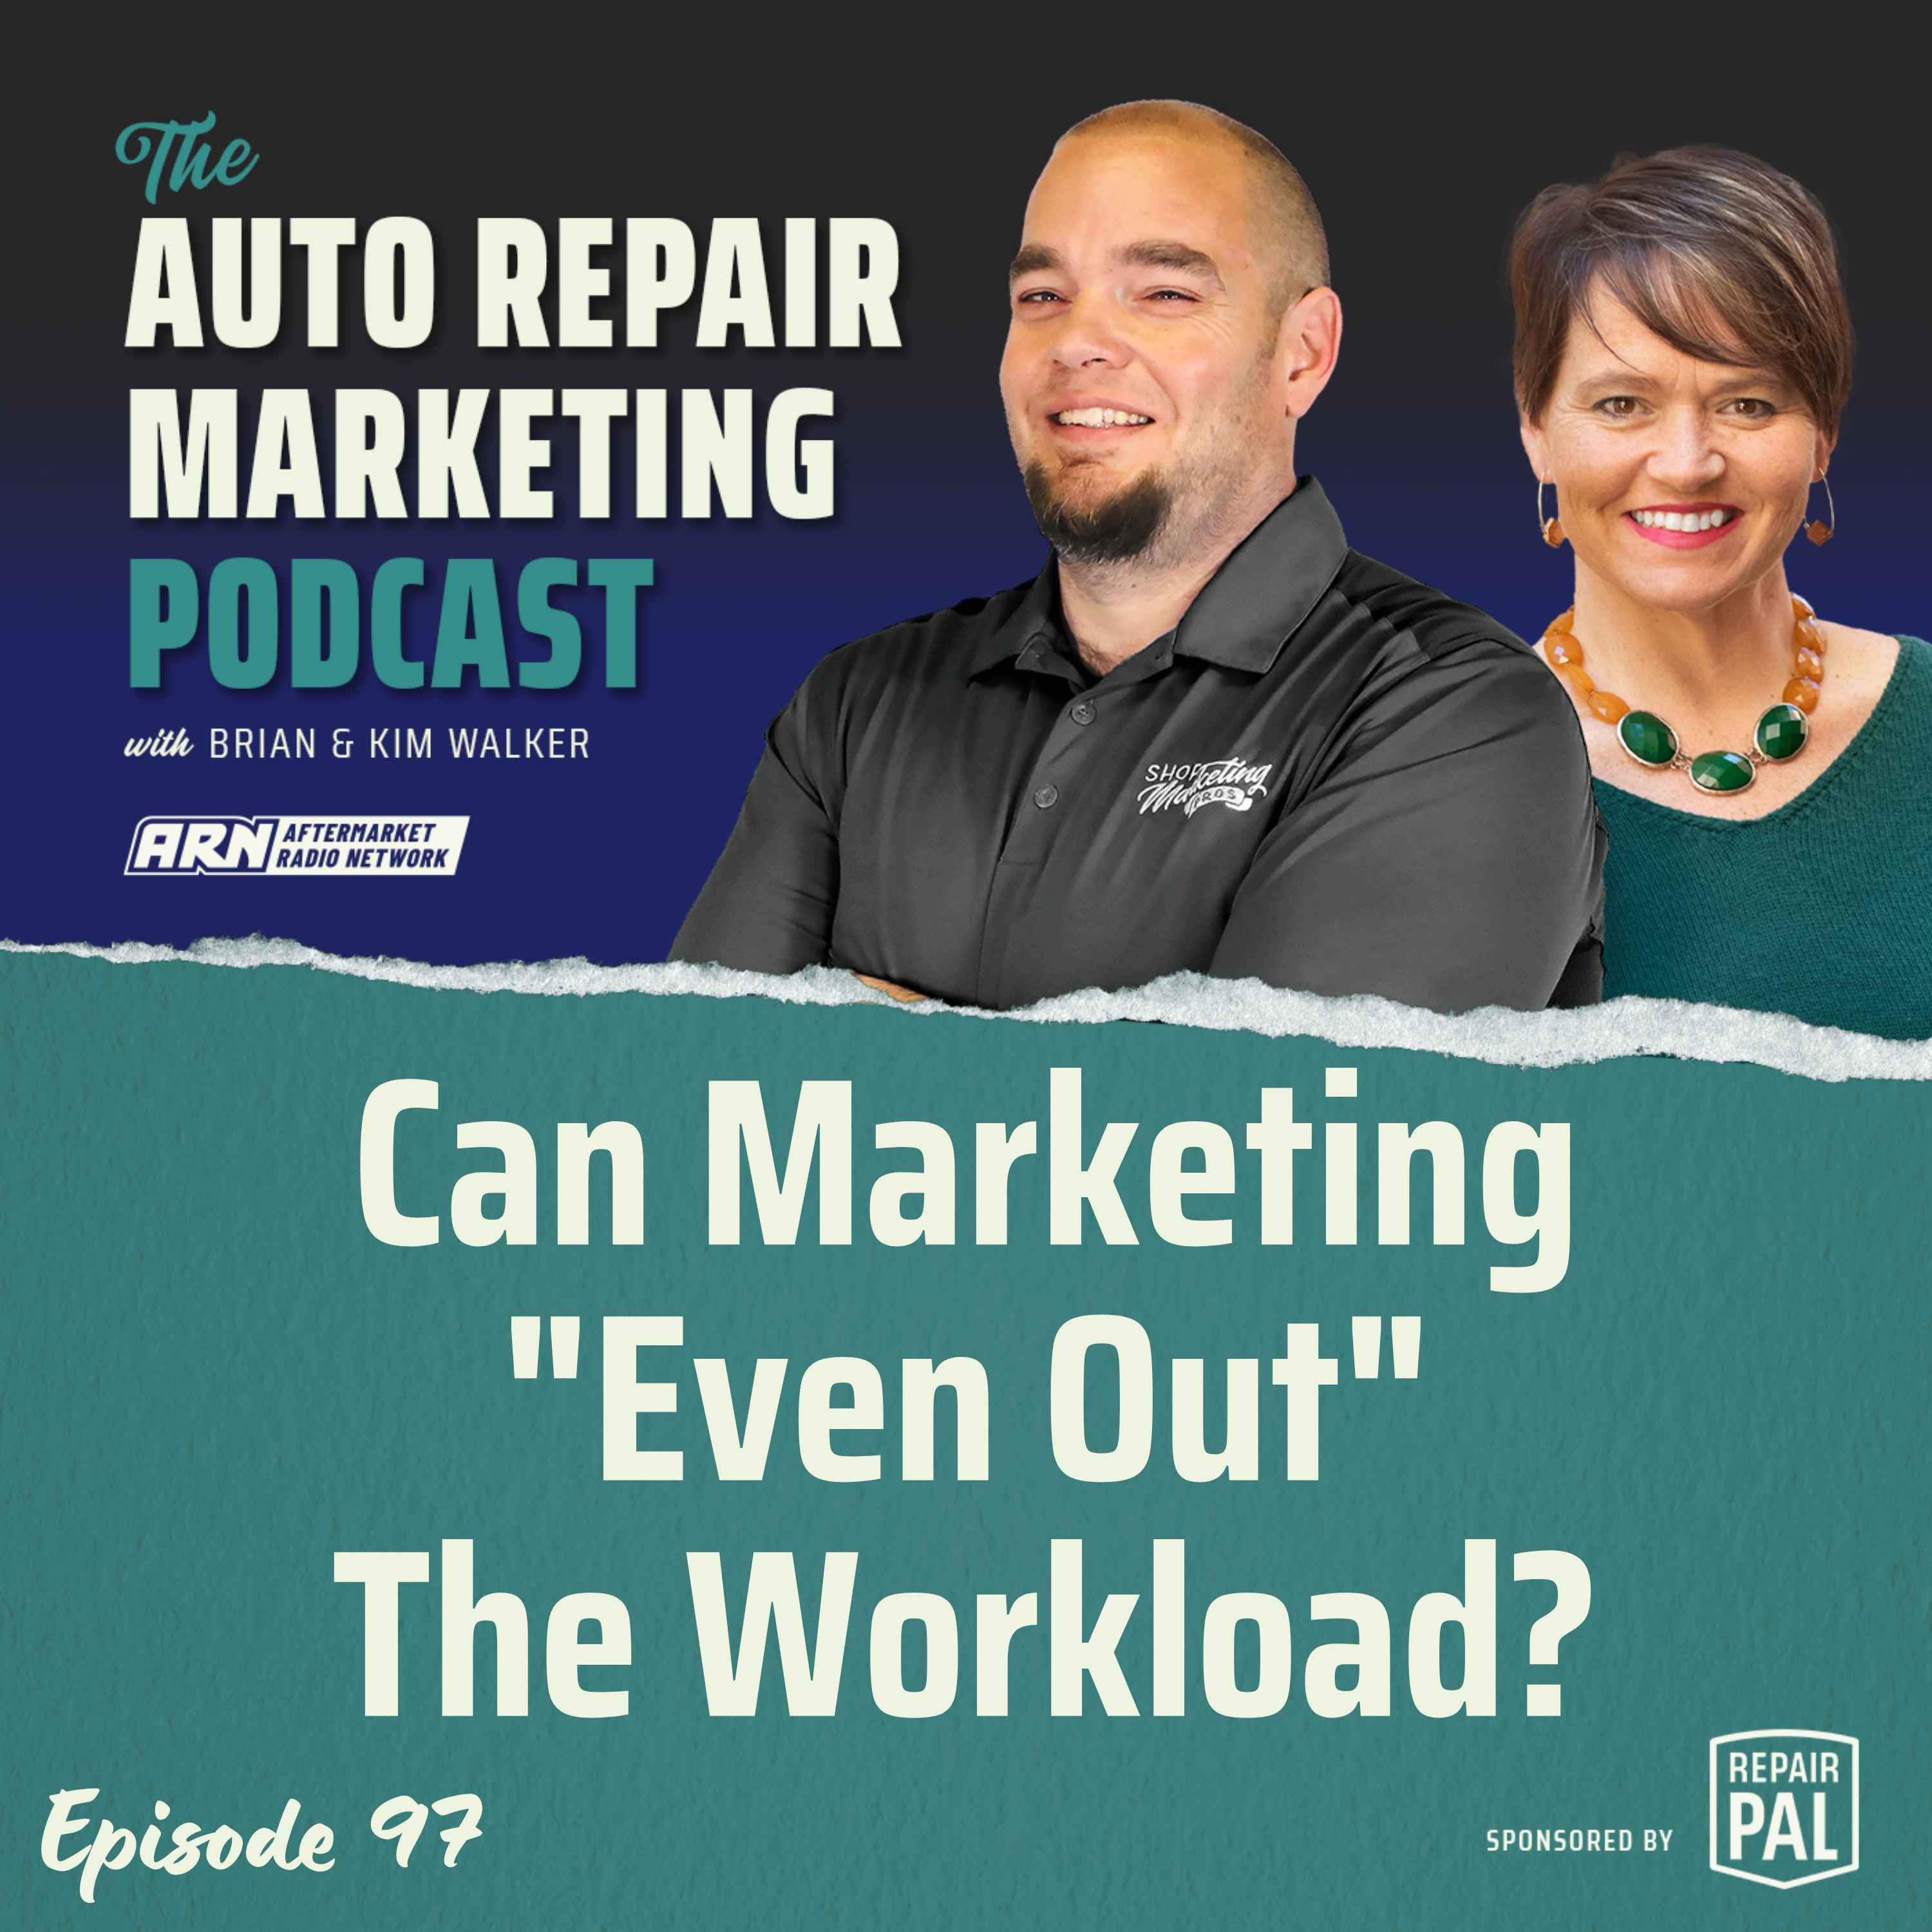 Can Marketing ”Even Out” The Workload? [E097] - The Auto Repair Marketing Podcast